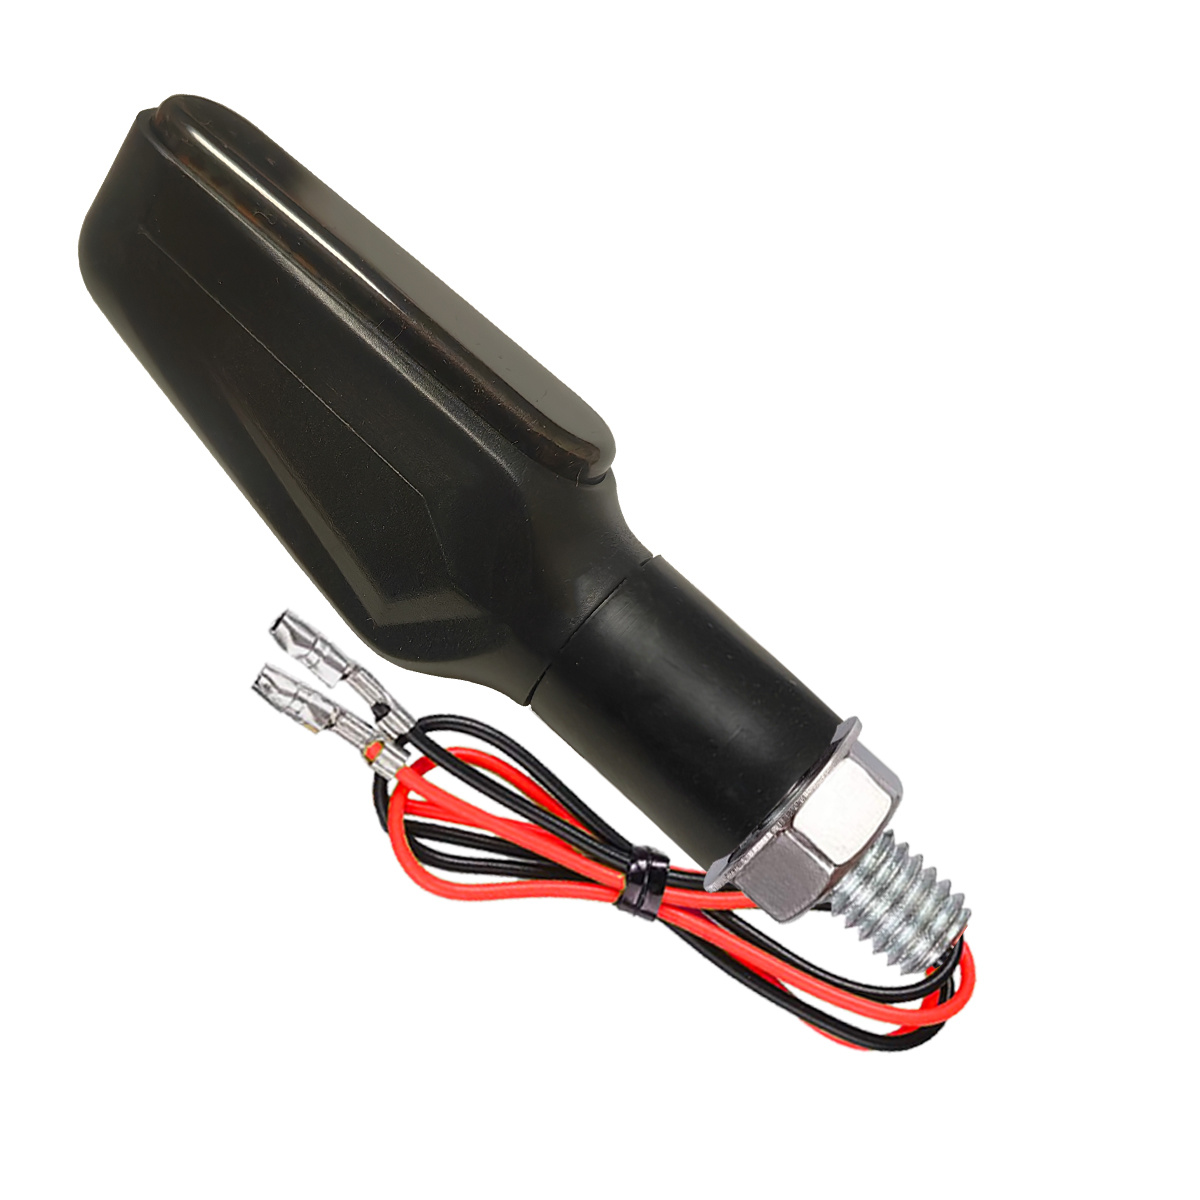 Turn SMD Signal Light for Motorcycle Directional Light